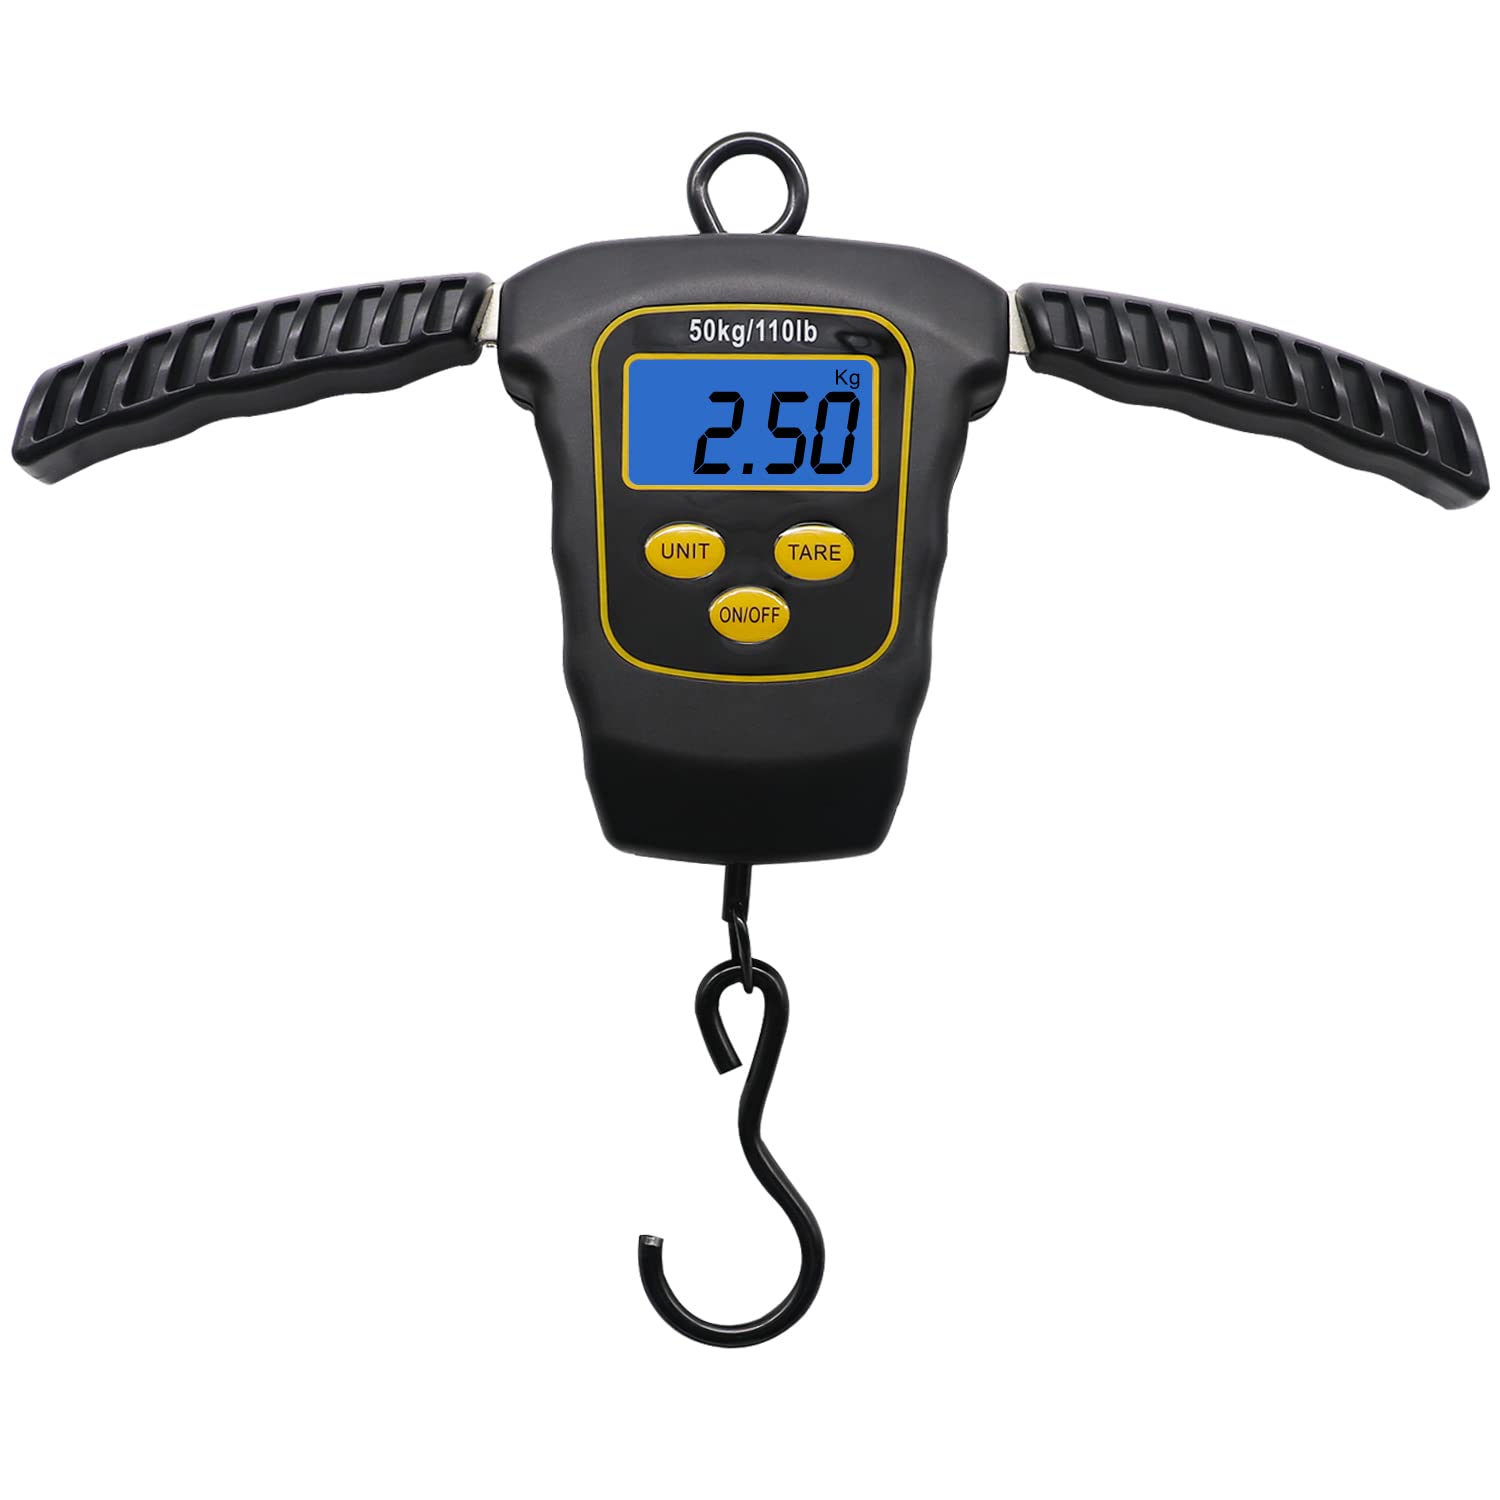 NGT DYNAMIC Digital Fishing scales Hanger stores away 110lb or